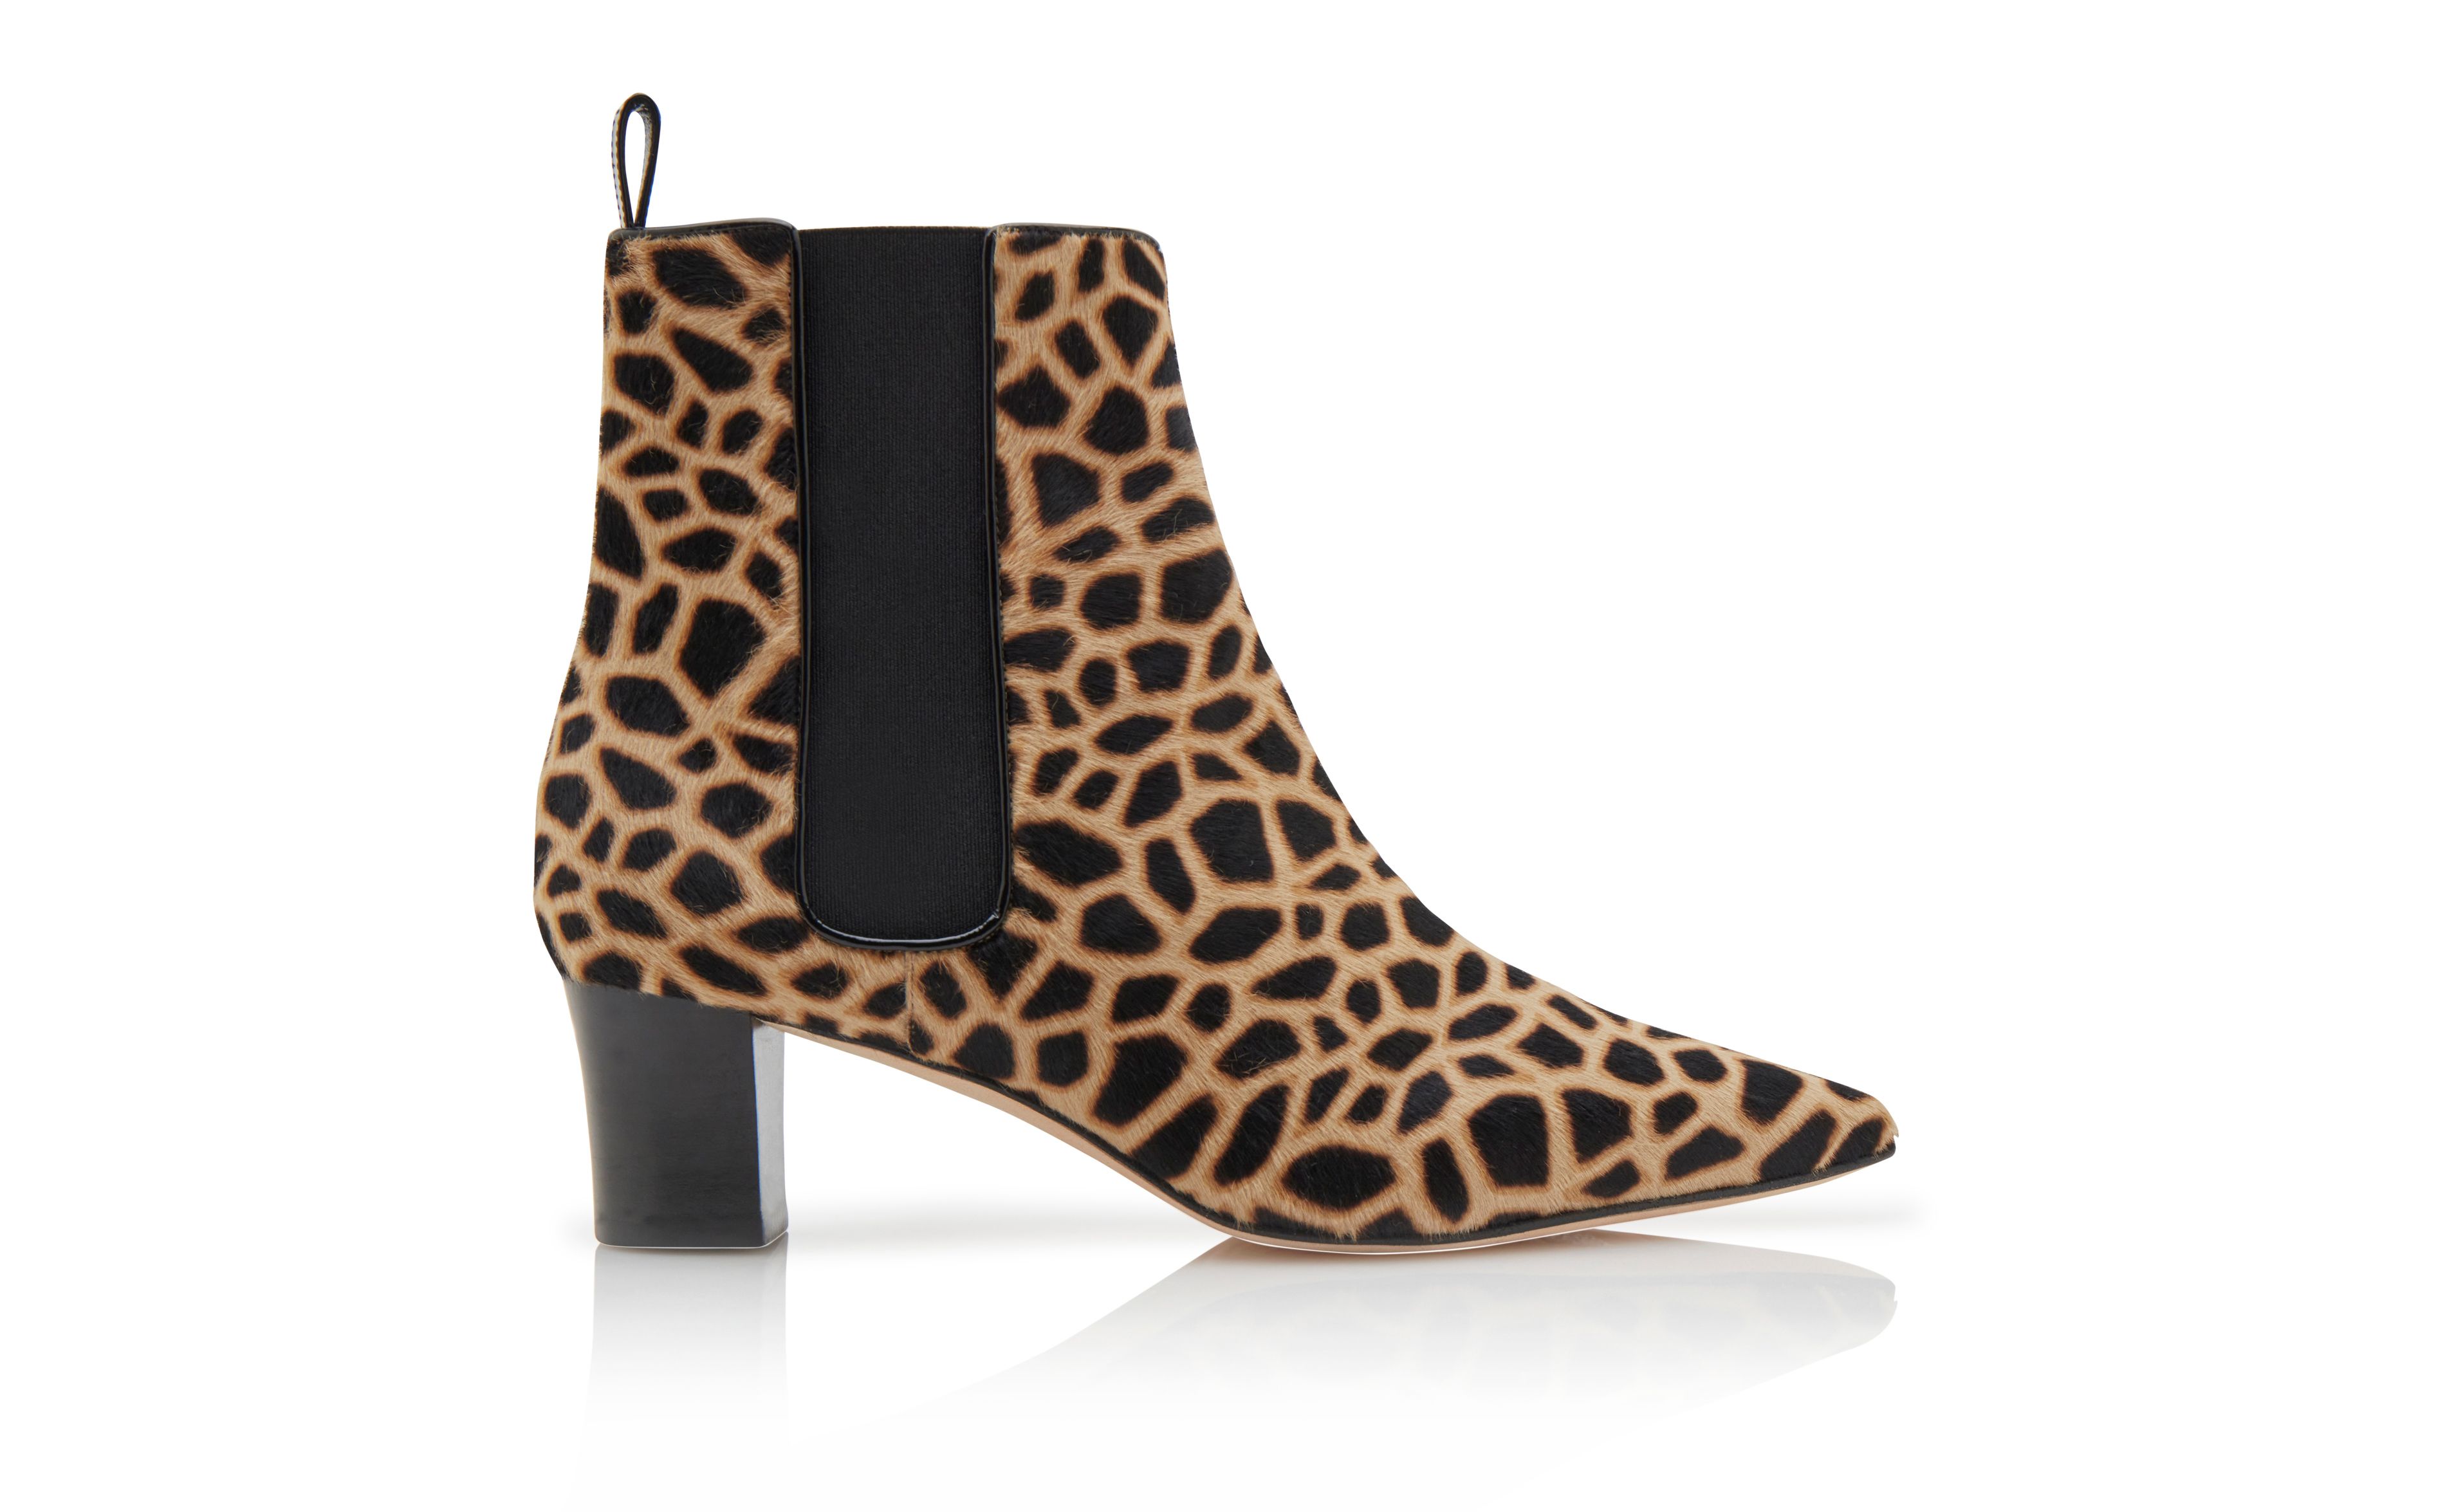 Designer Brown and Black Calf Hair Animal Print Boots - Image Side View